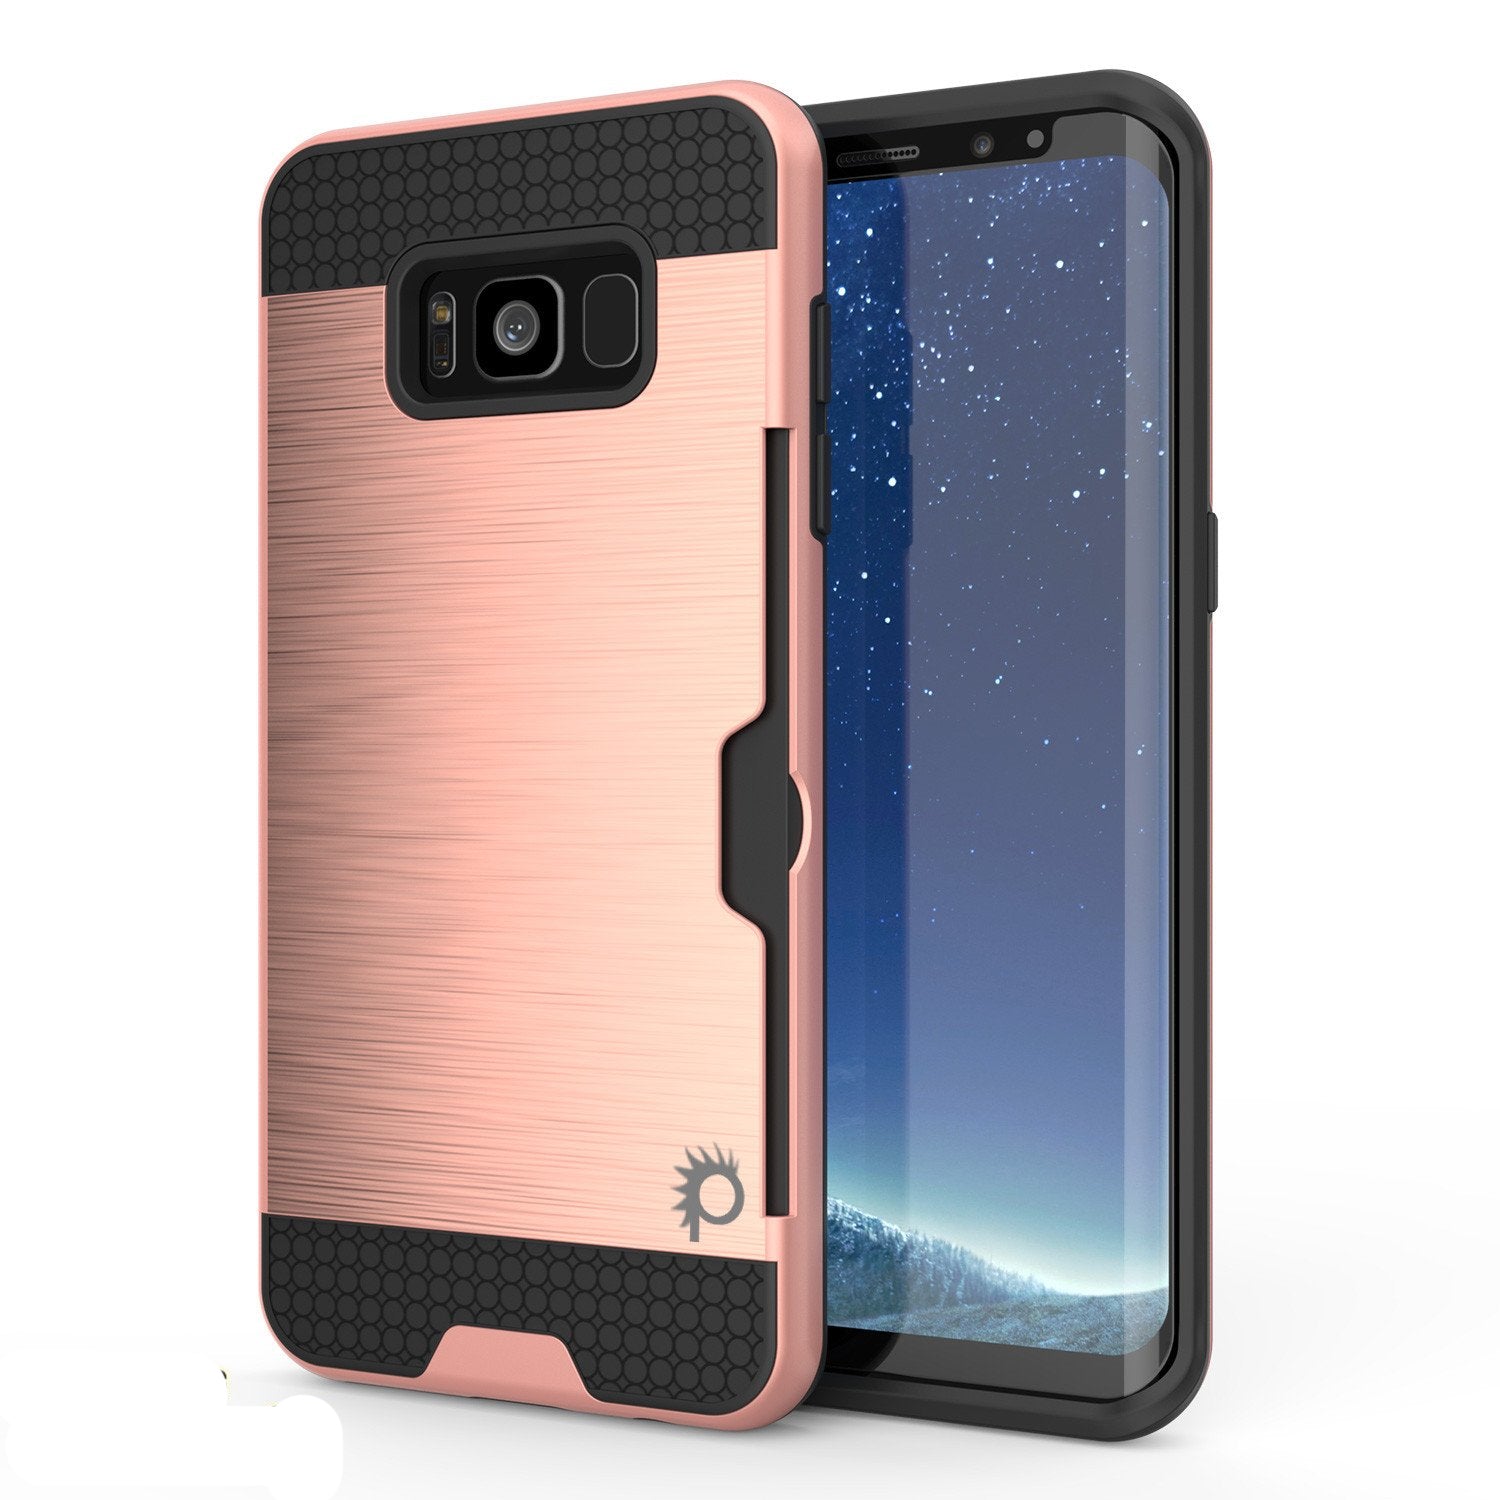 Galaxy S8 Plus case SLOT Series Dual-Layer Armor Cover, Rose Gold